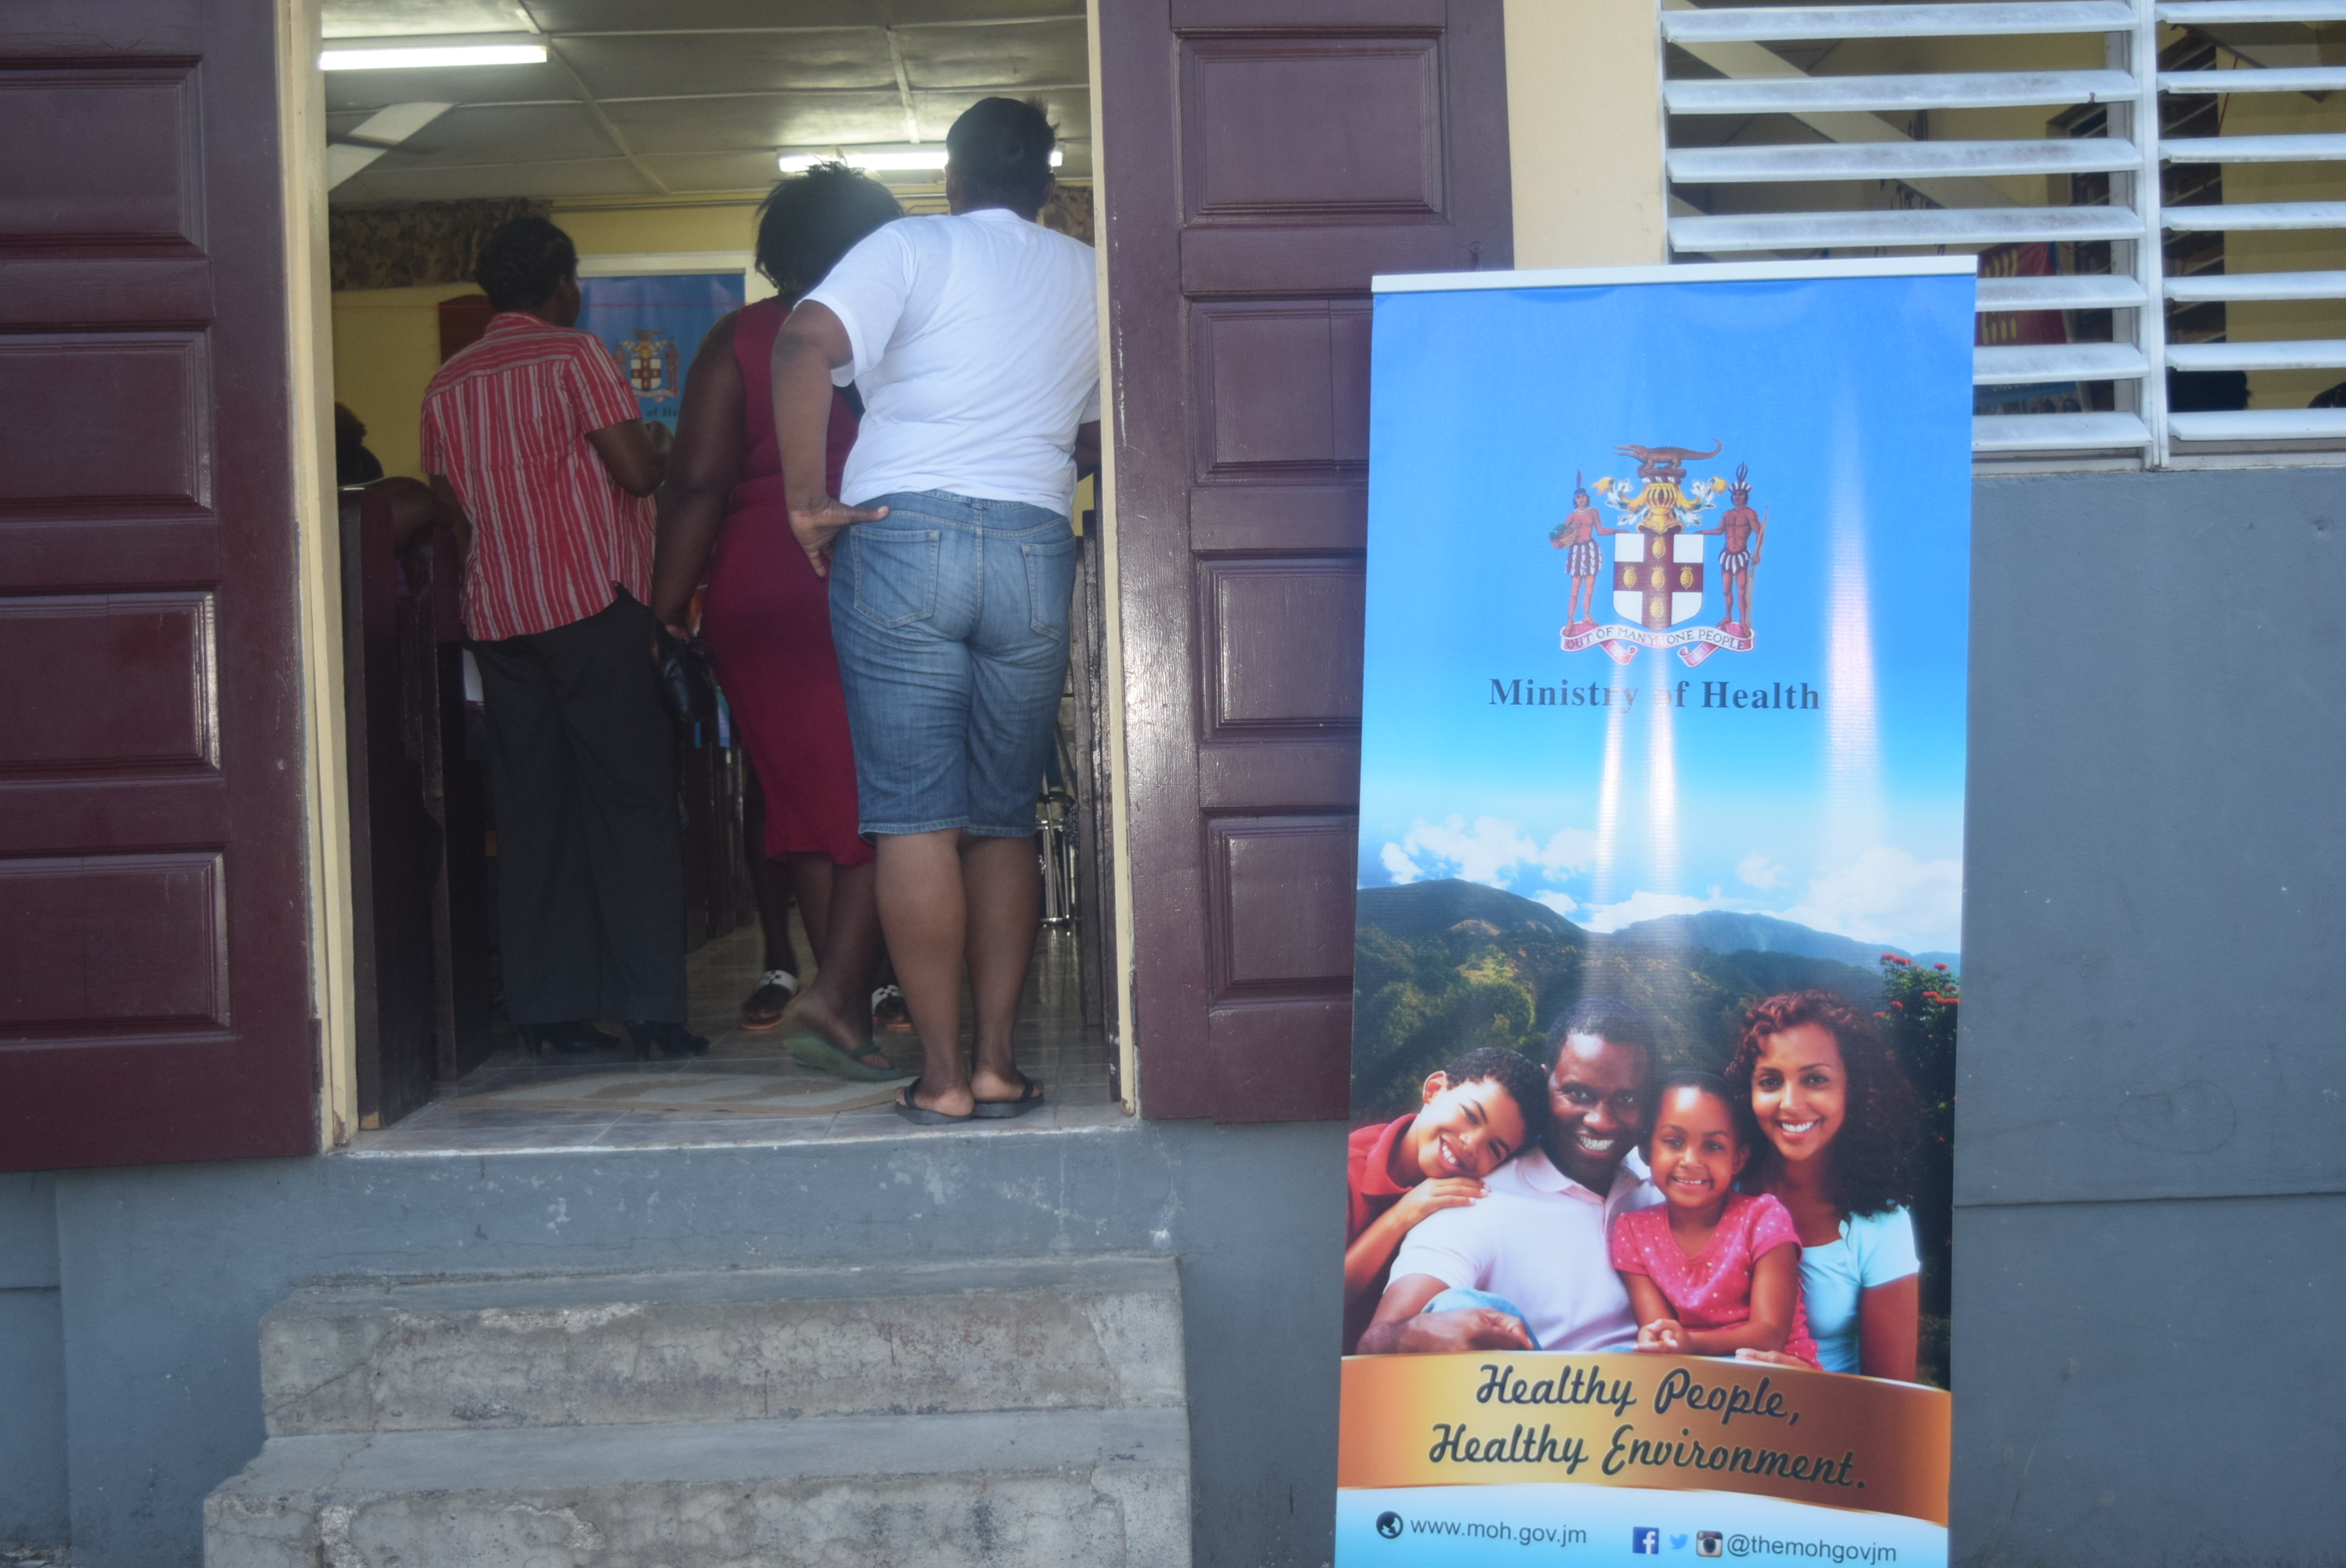 Zika Community Meeting held on Wednesday August 24, 2016 in Dalvey St. Thomas.